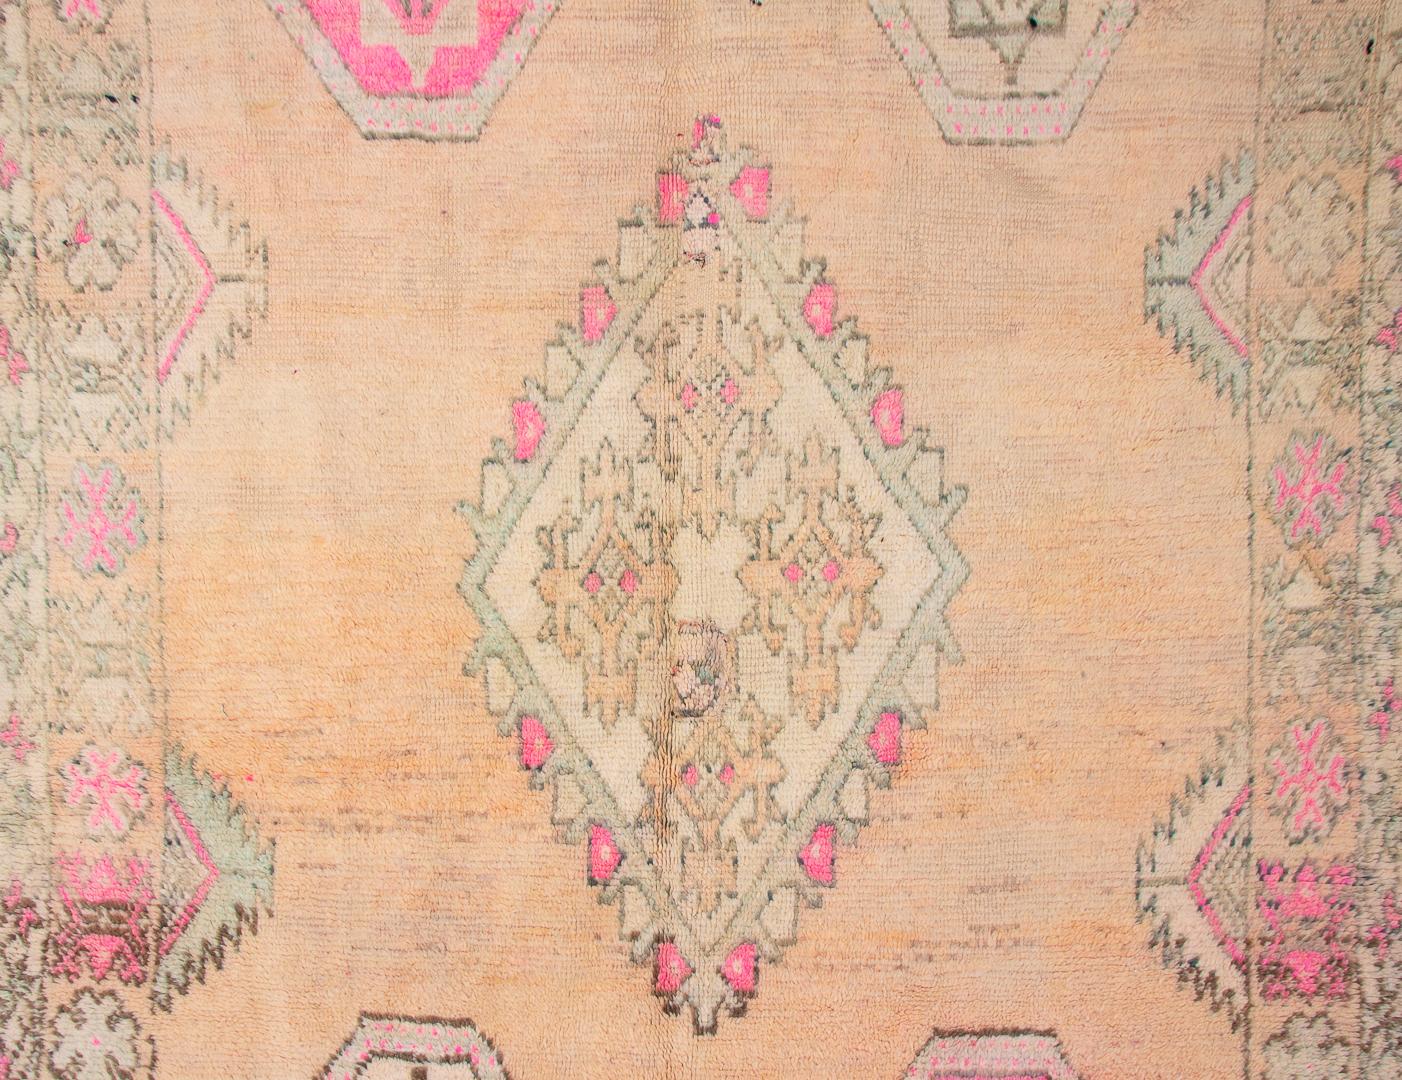 Hand-Knotted Rare Vintage Berber Moroccan Rug, Tribal Style - circa 1950 For Sale